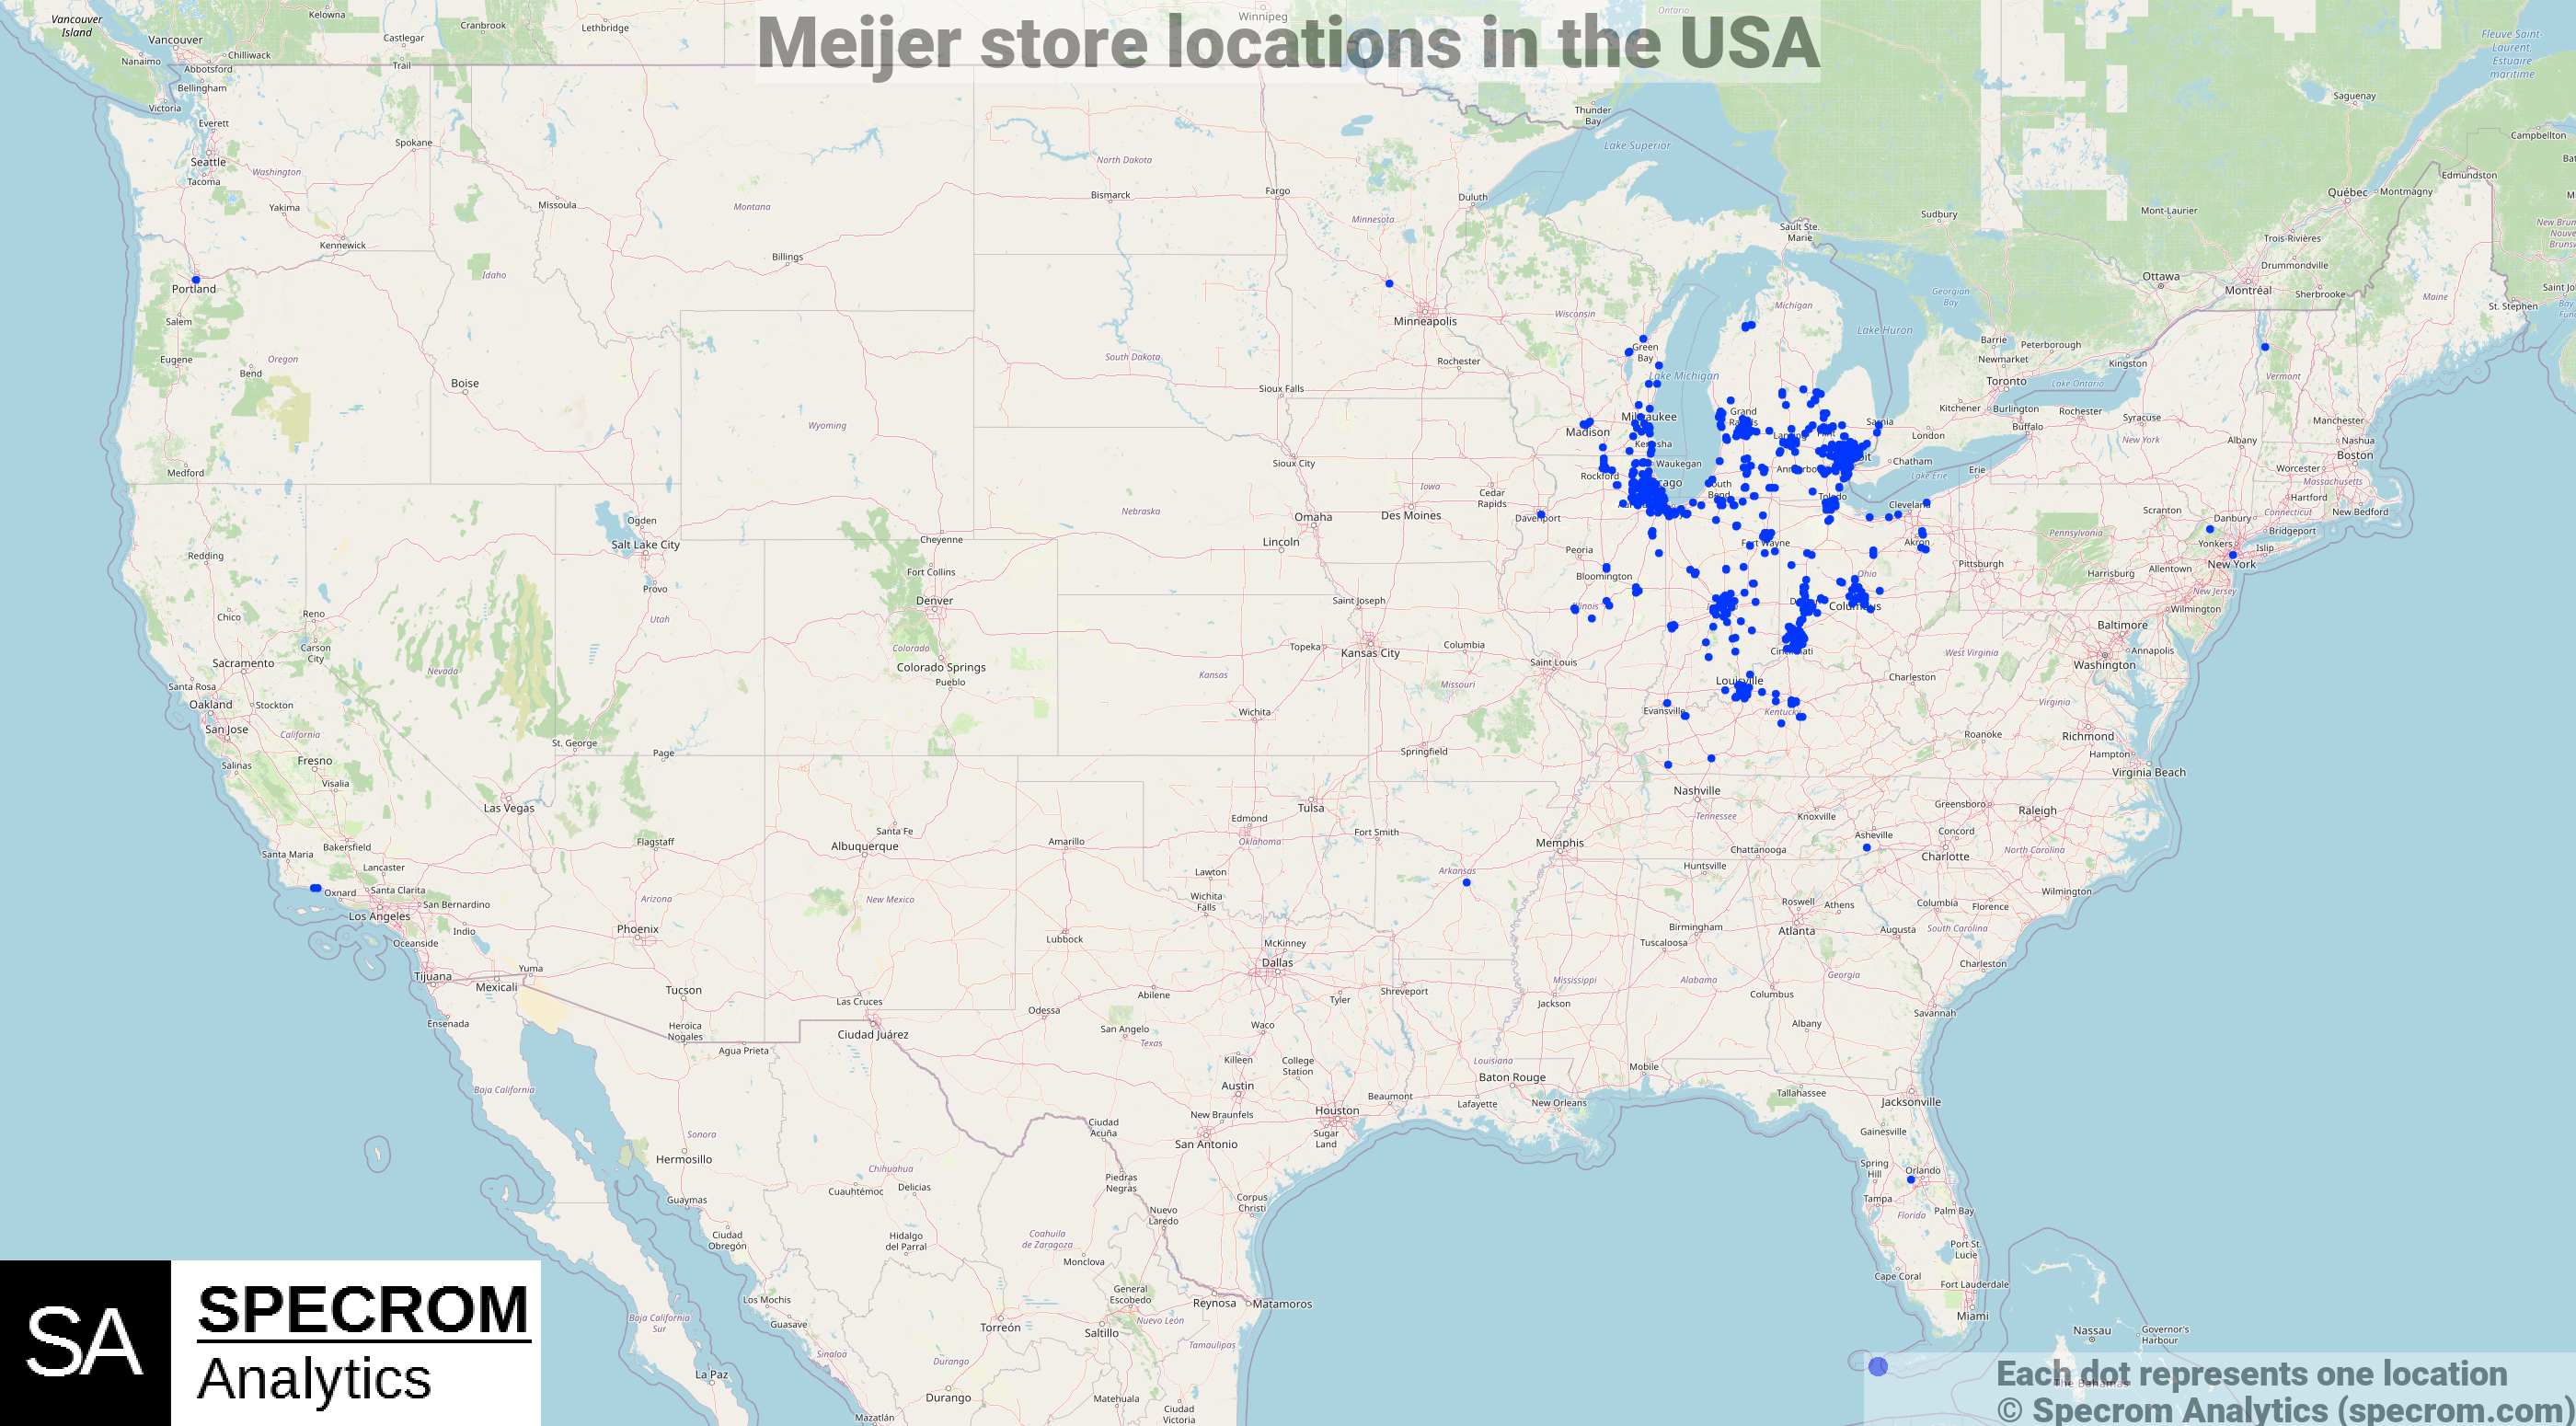 Meijer store locations in the USA